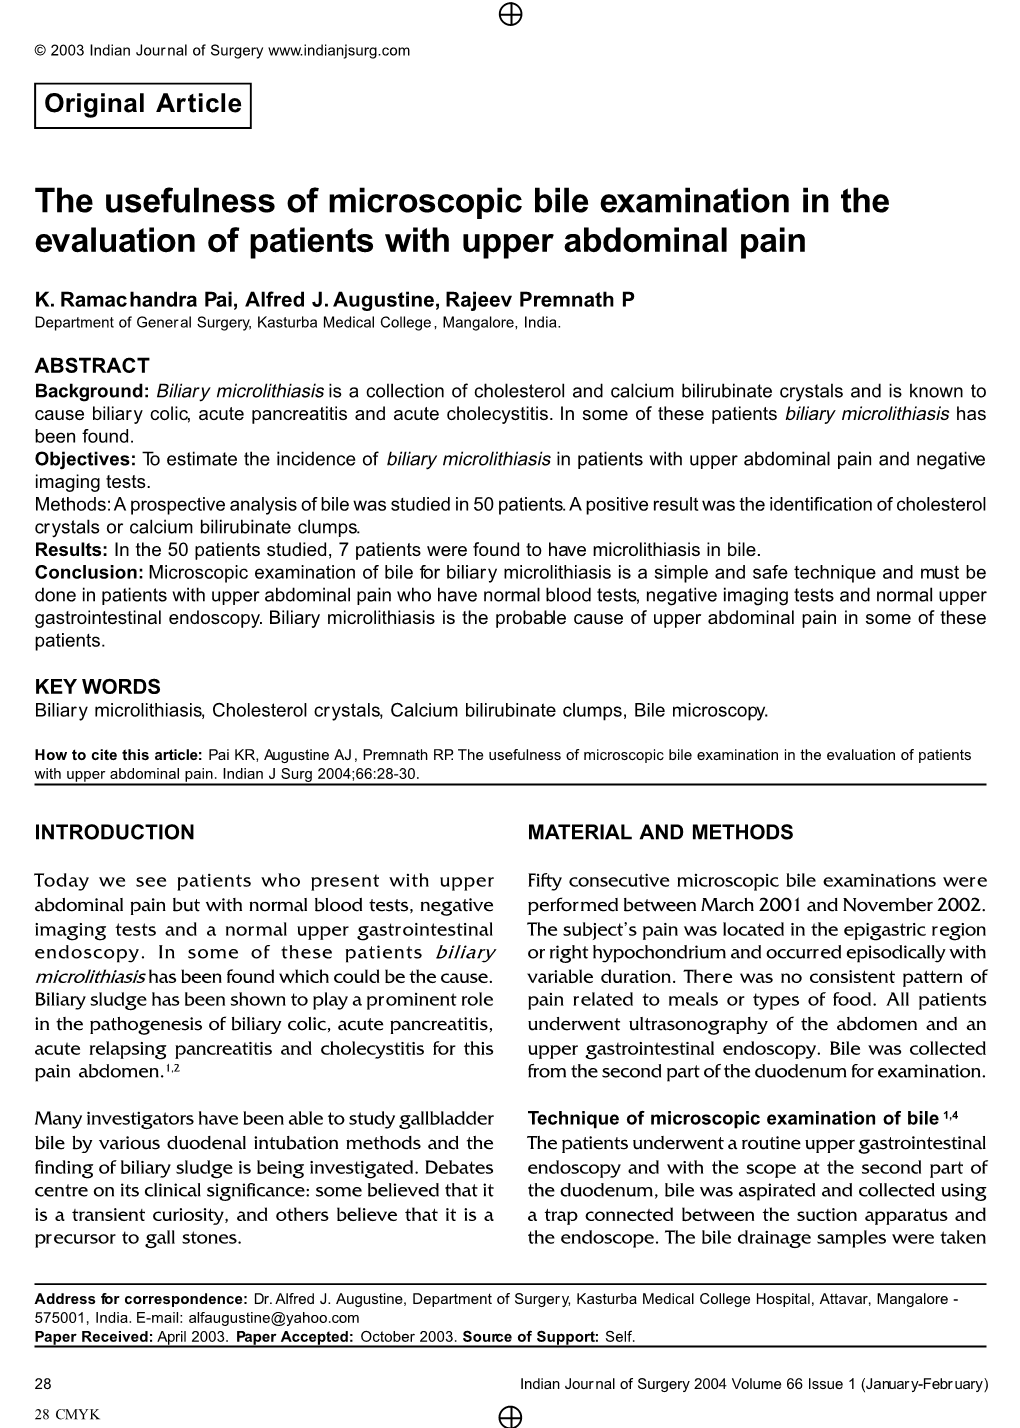 The Usefulness of Microscopic Bile Examination in the Evaluation of Patients with Upper Abdominal Pain